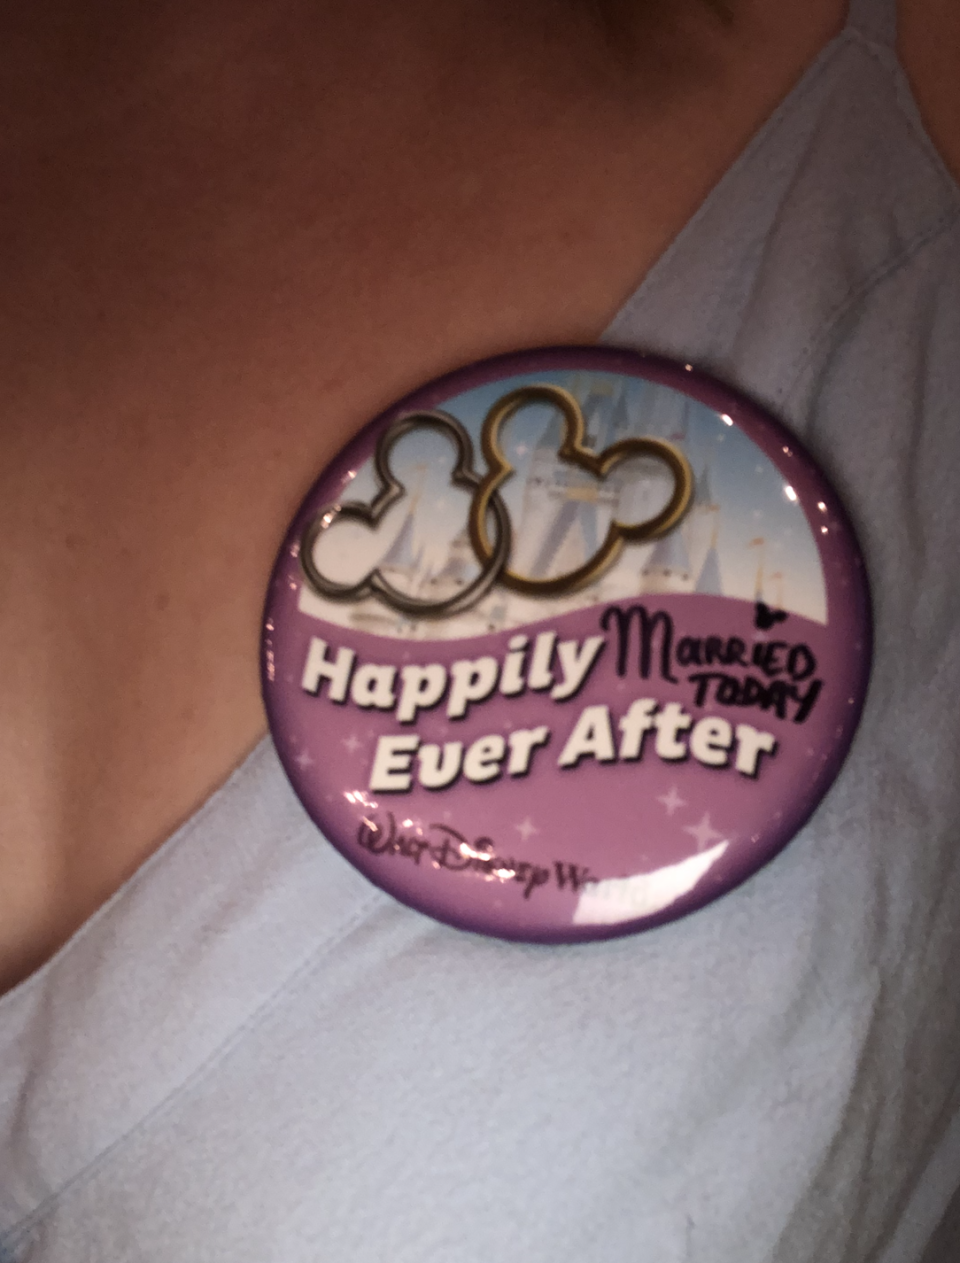 "Happily Ever After" button